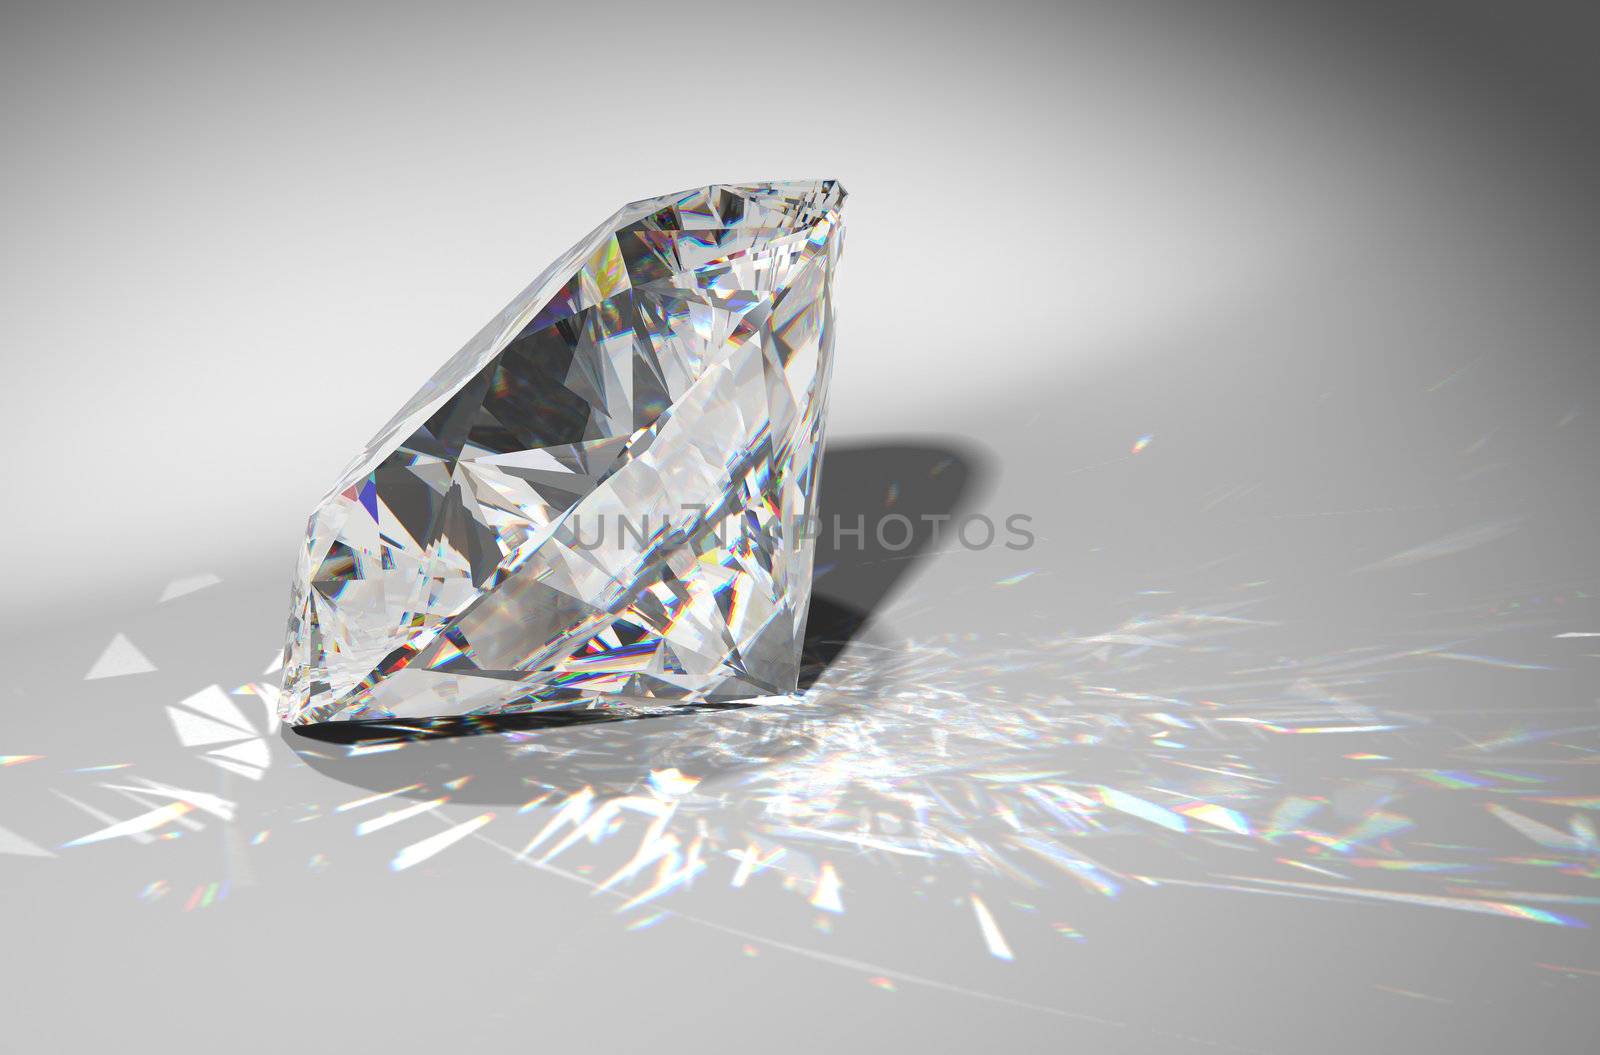 One large diamond with sparkles over gradient background